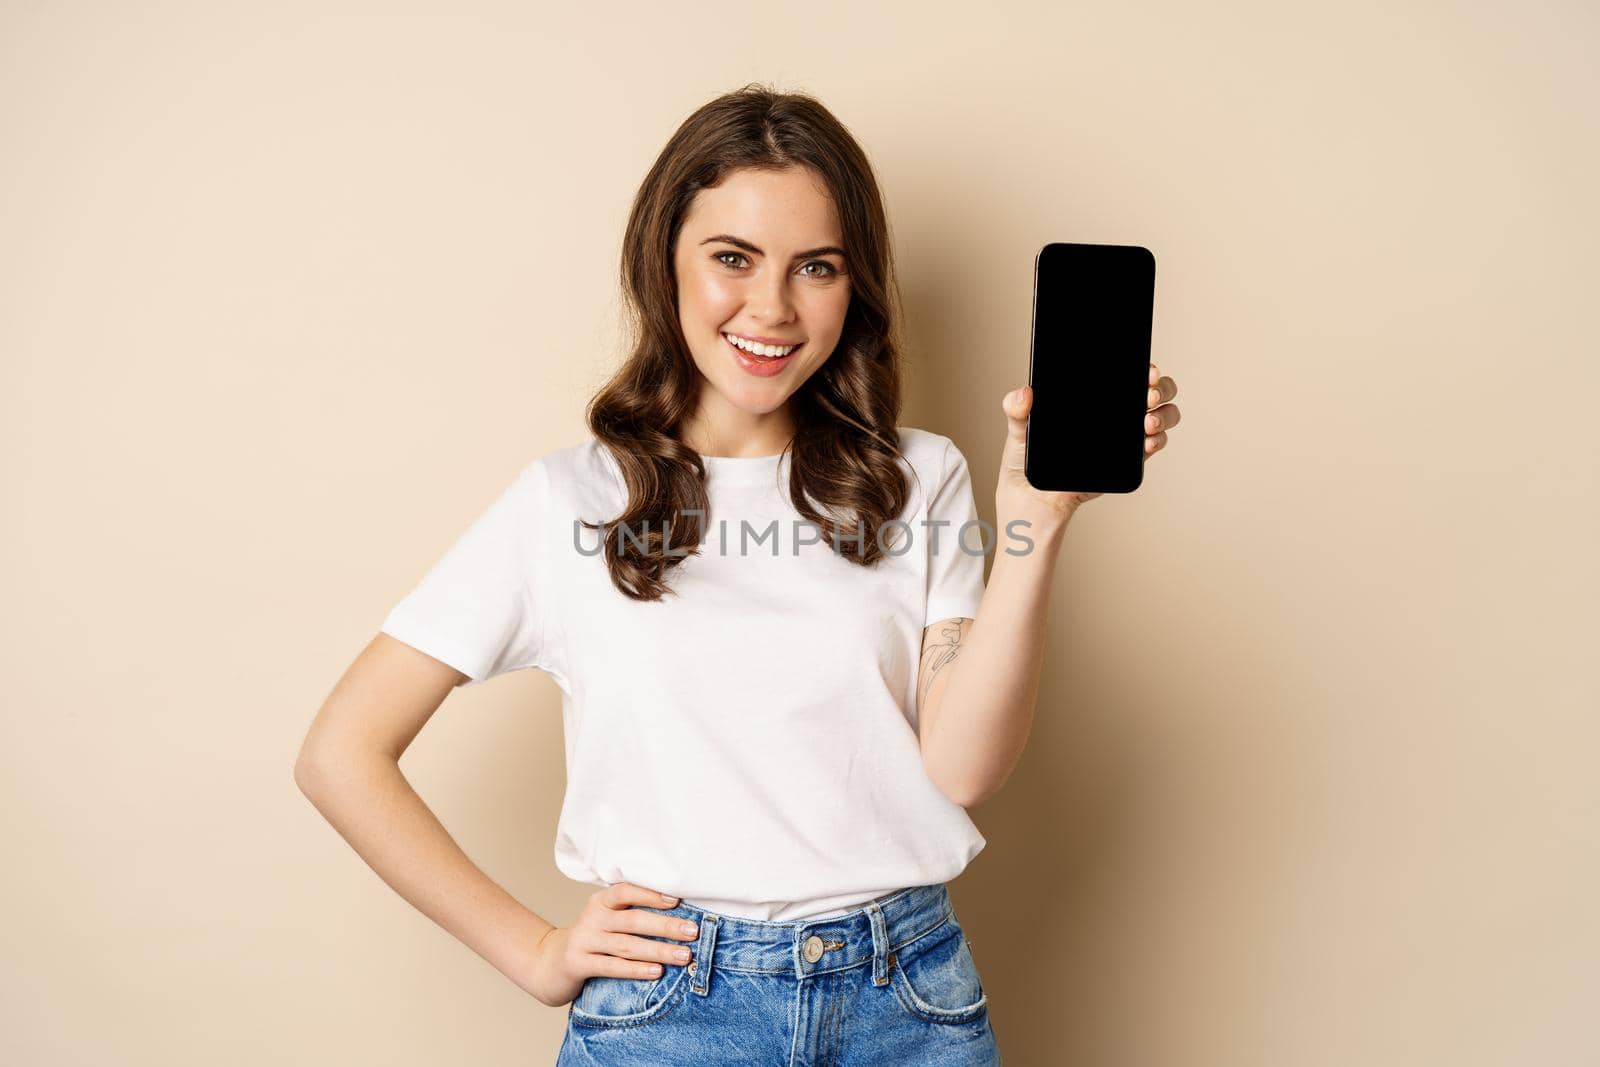 Online shopping and app concept. Young woman smiling and showing mobile phone screen, application interface, standing over beige background.